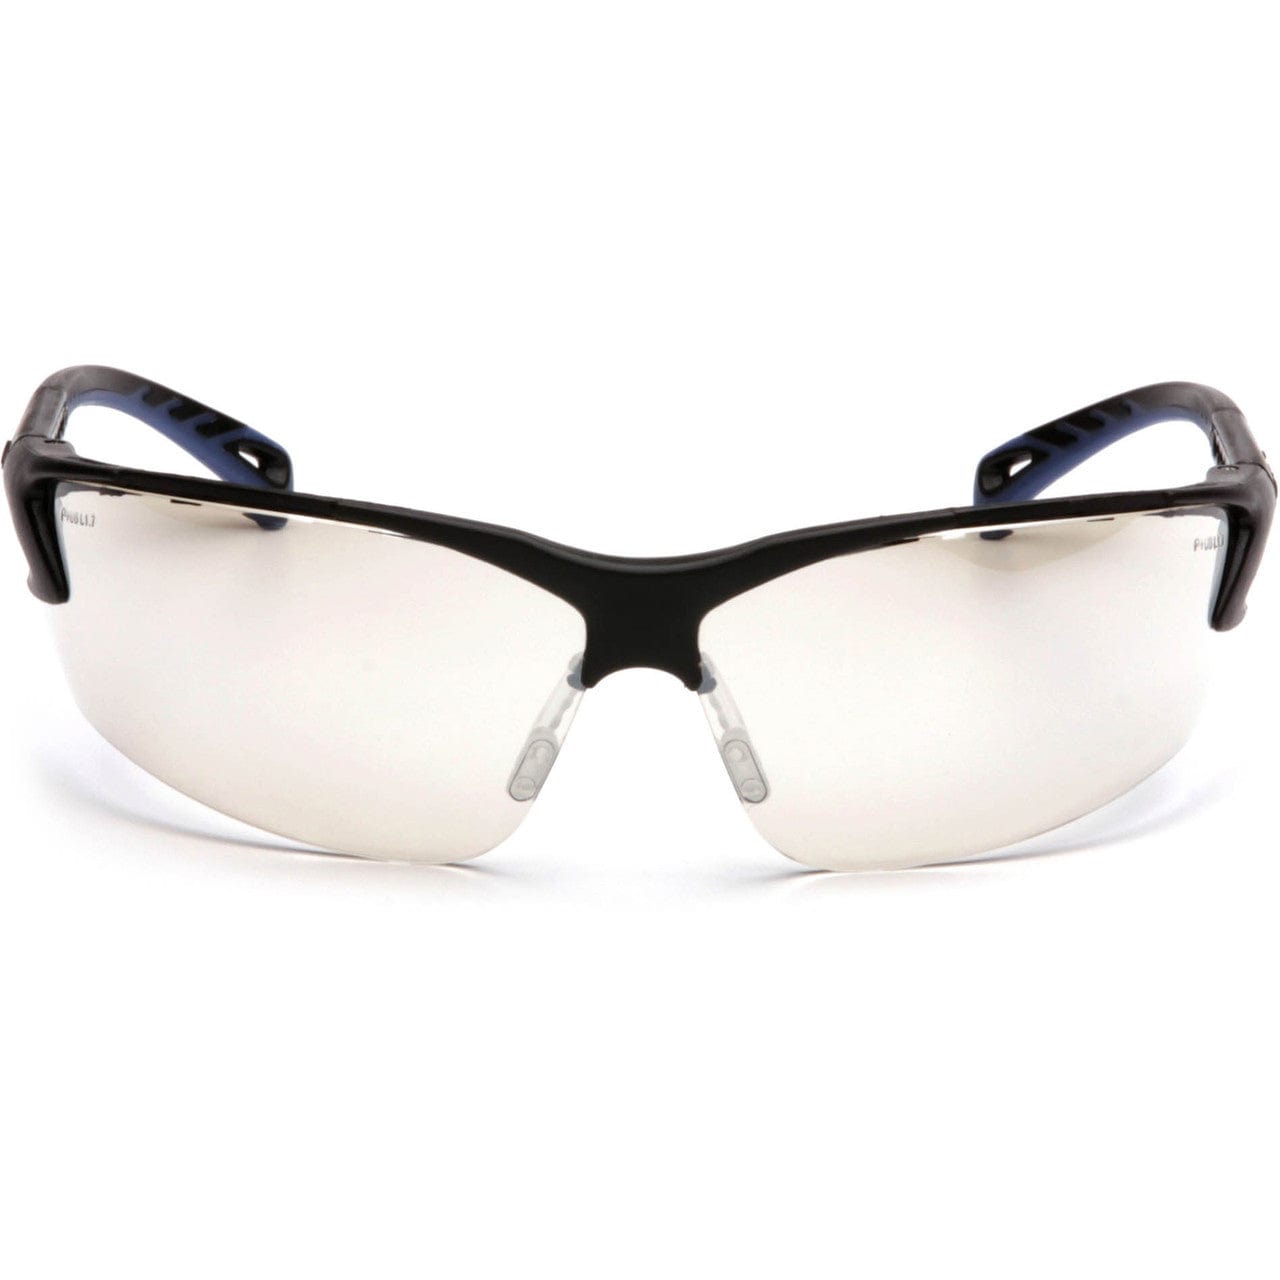 Pyramex Venture 3 Safety Glasses with Black Frame and Indoor/Outdoor Lens SB5780D Front View